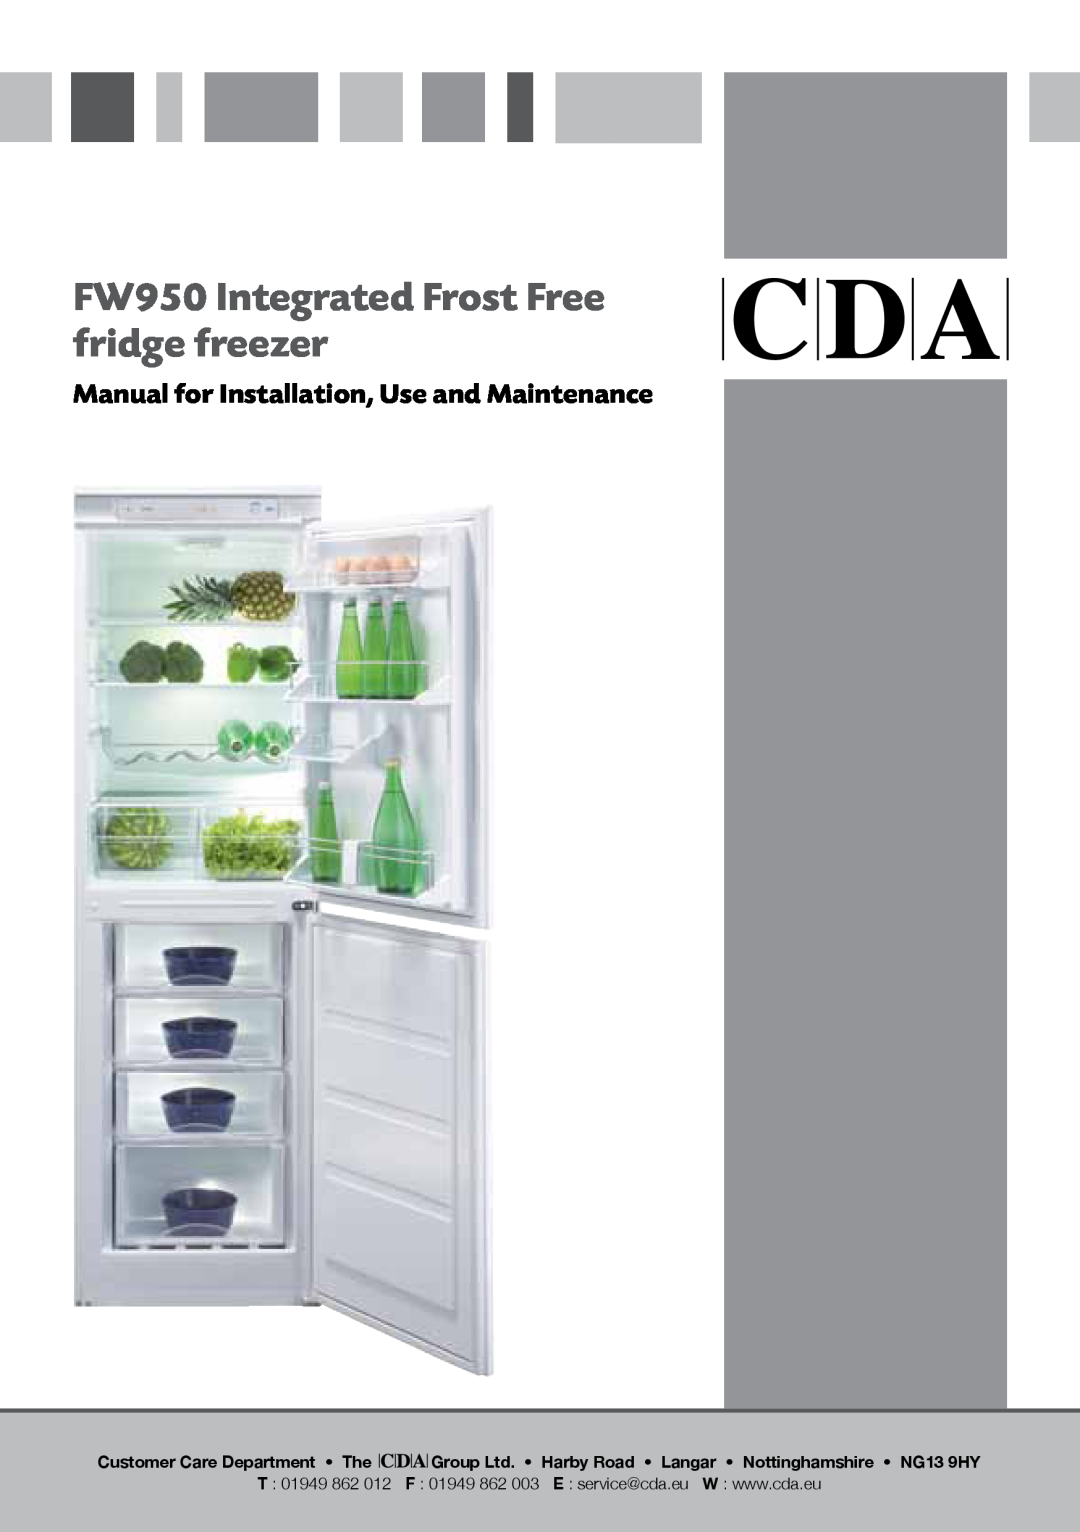 CDA manual FW950 Integrated Frost Free fridge freezer, Manual for Installation, Use and Maintenance 